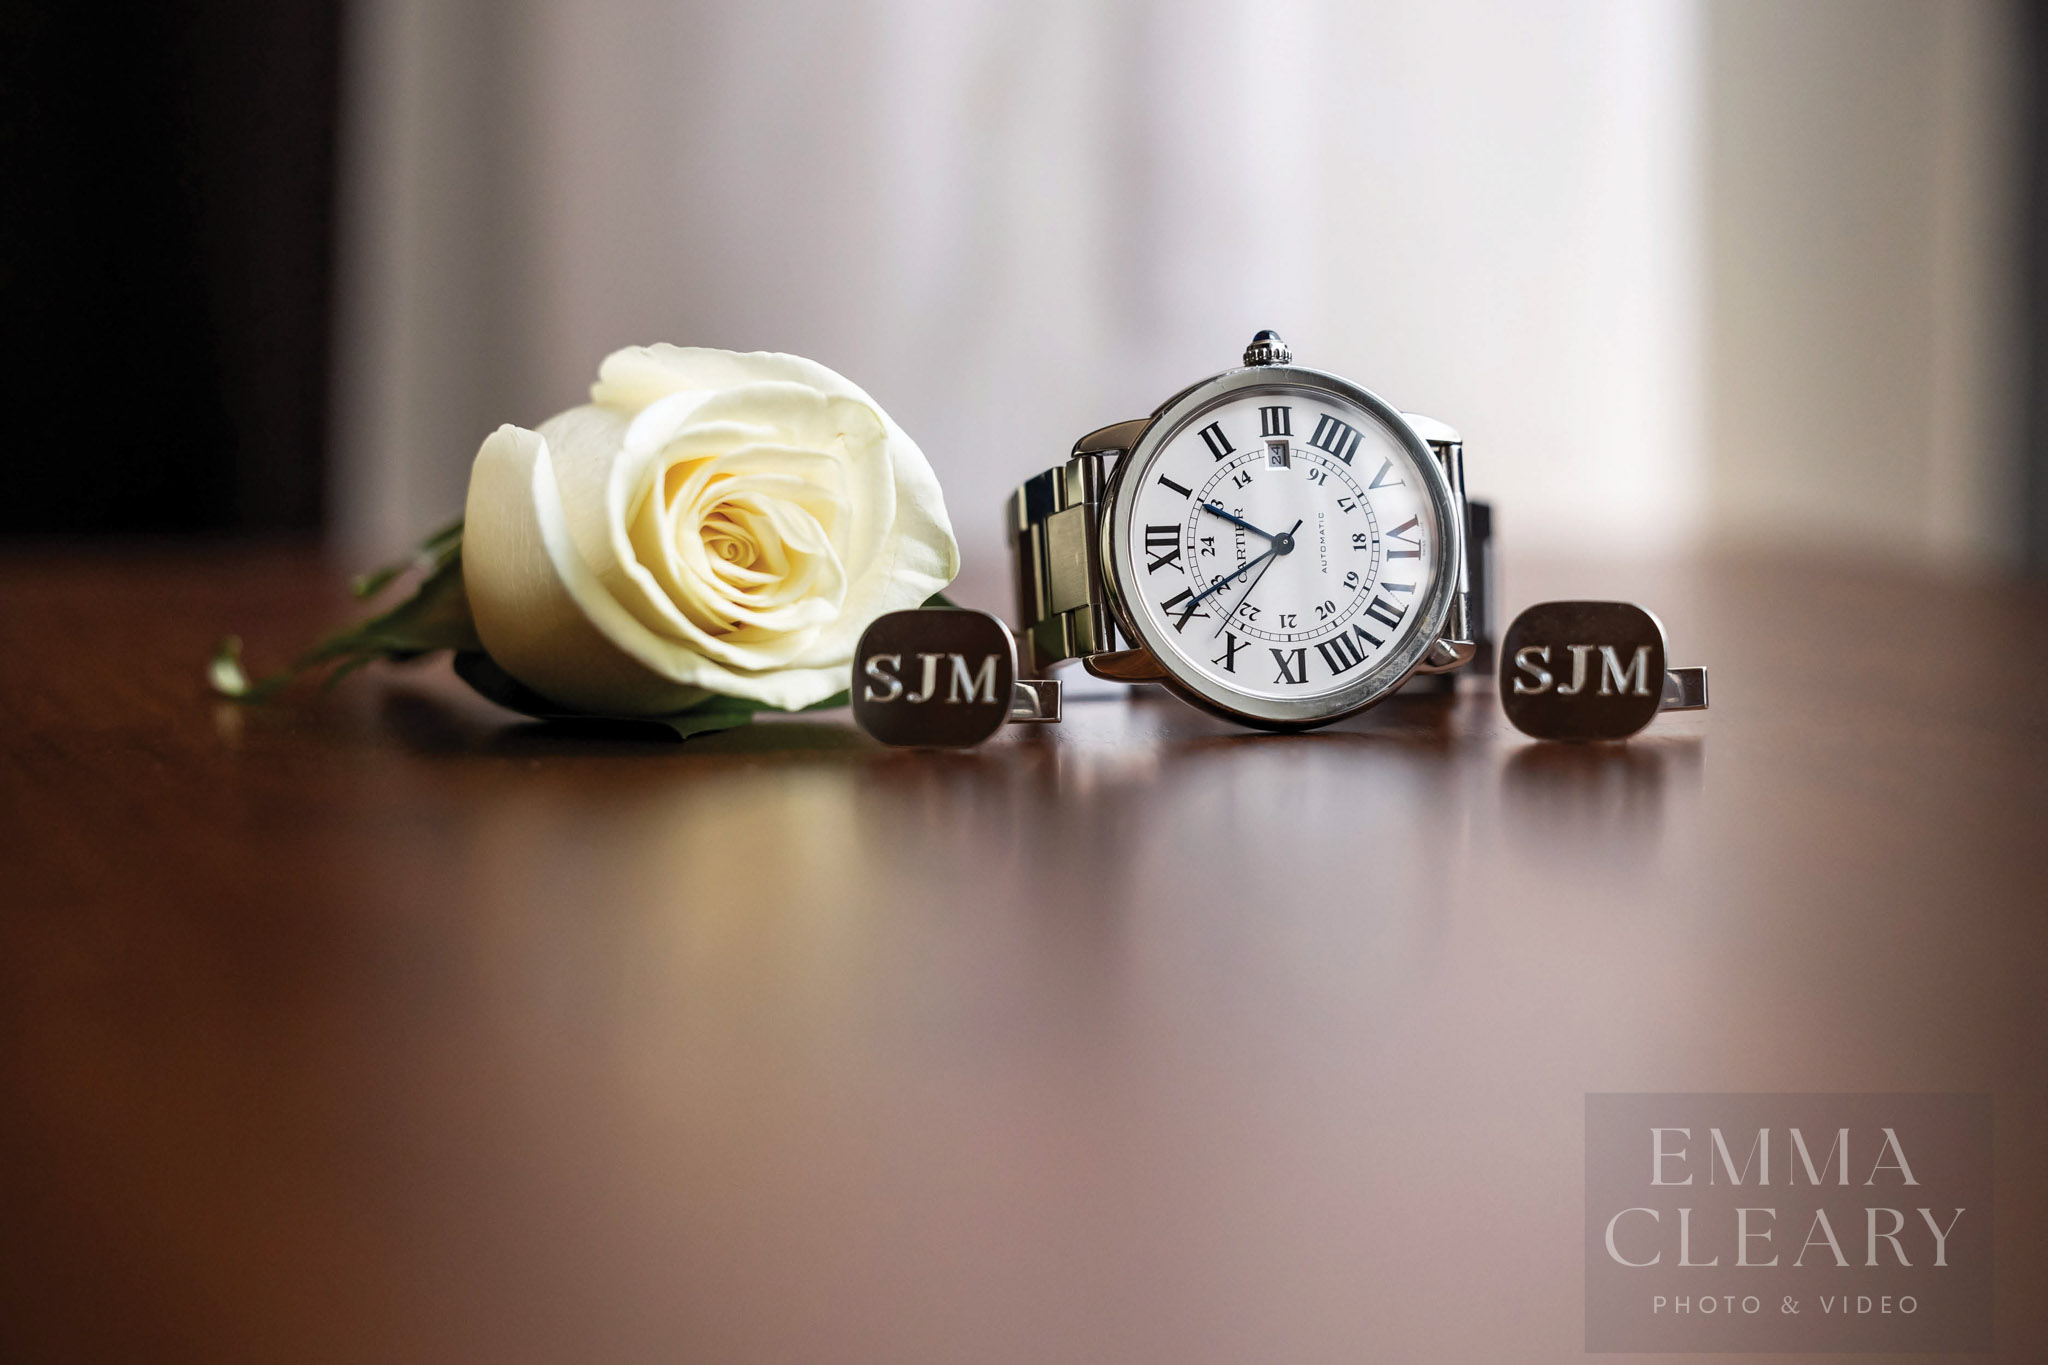 The groom's boutonniere, watch and cufflinks